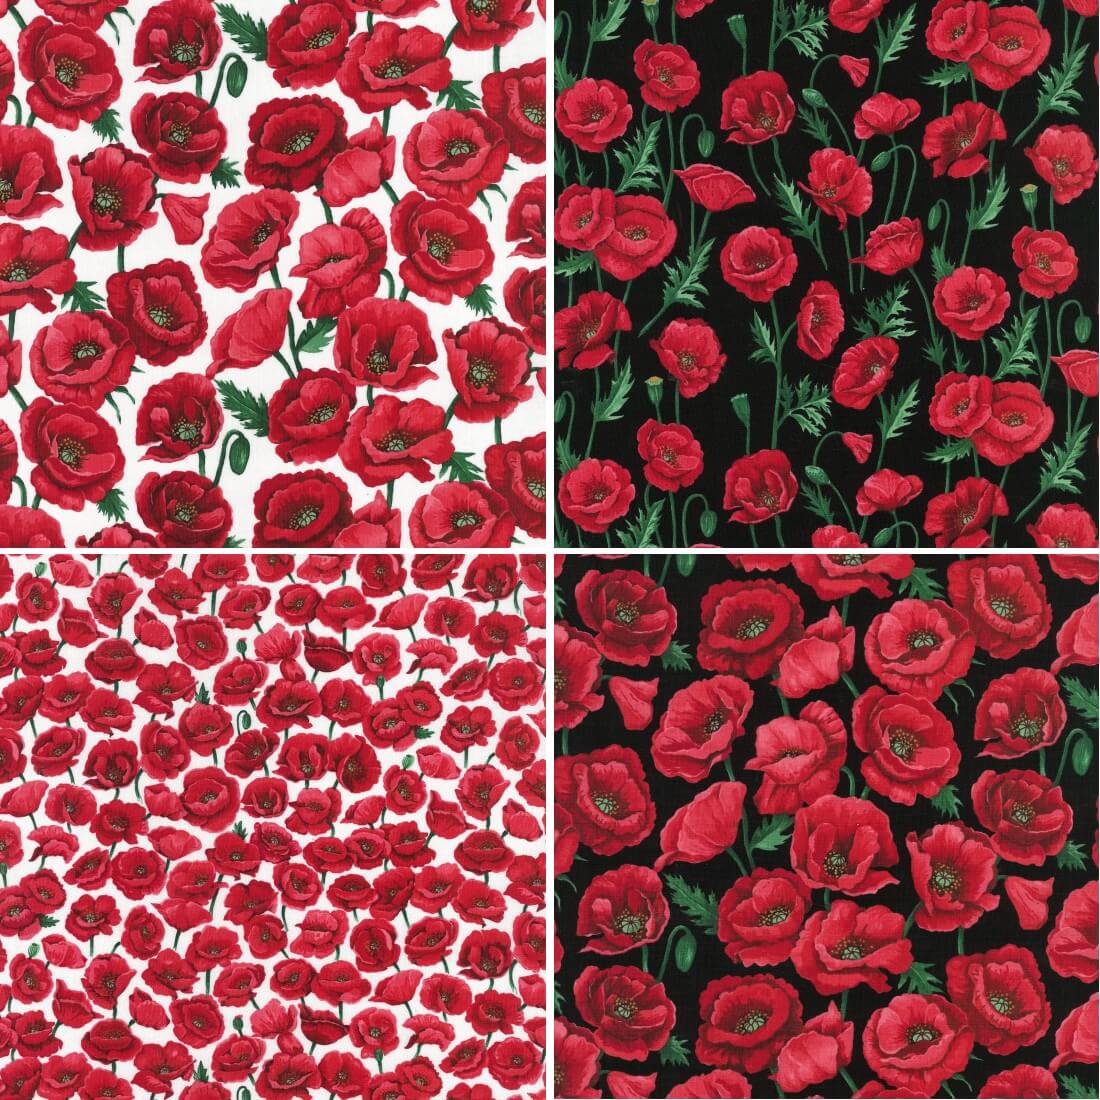 Blossom Black 100% Cotton Fabric Nutex Poppies Poppy Floral Flowers Collection